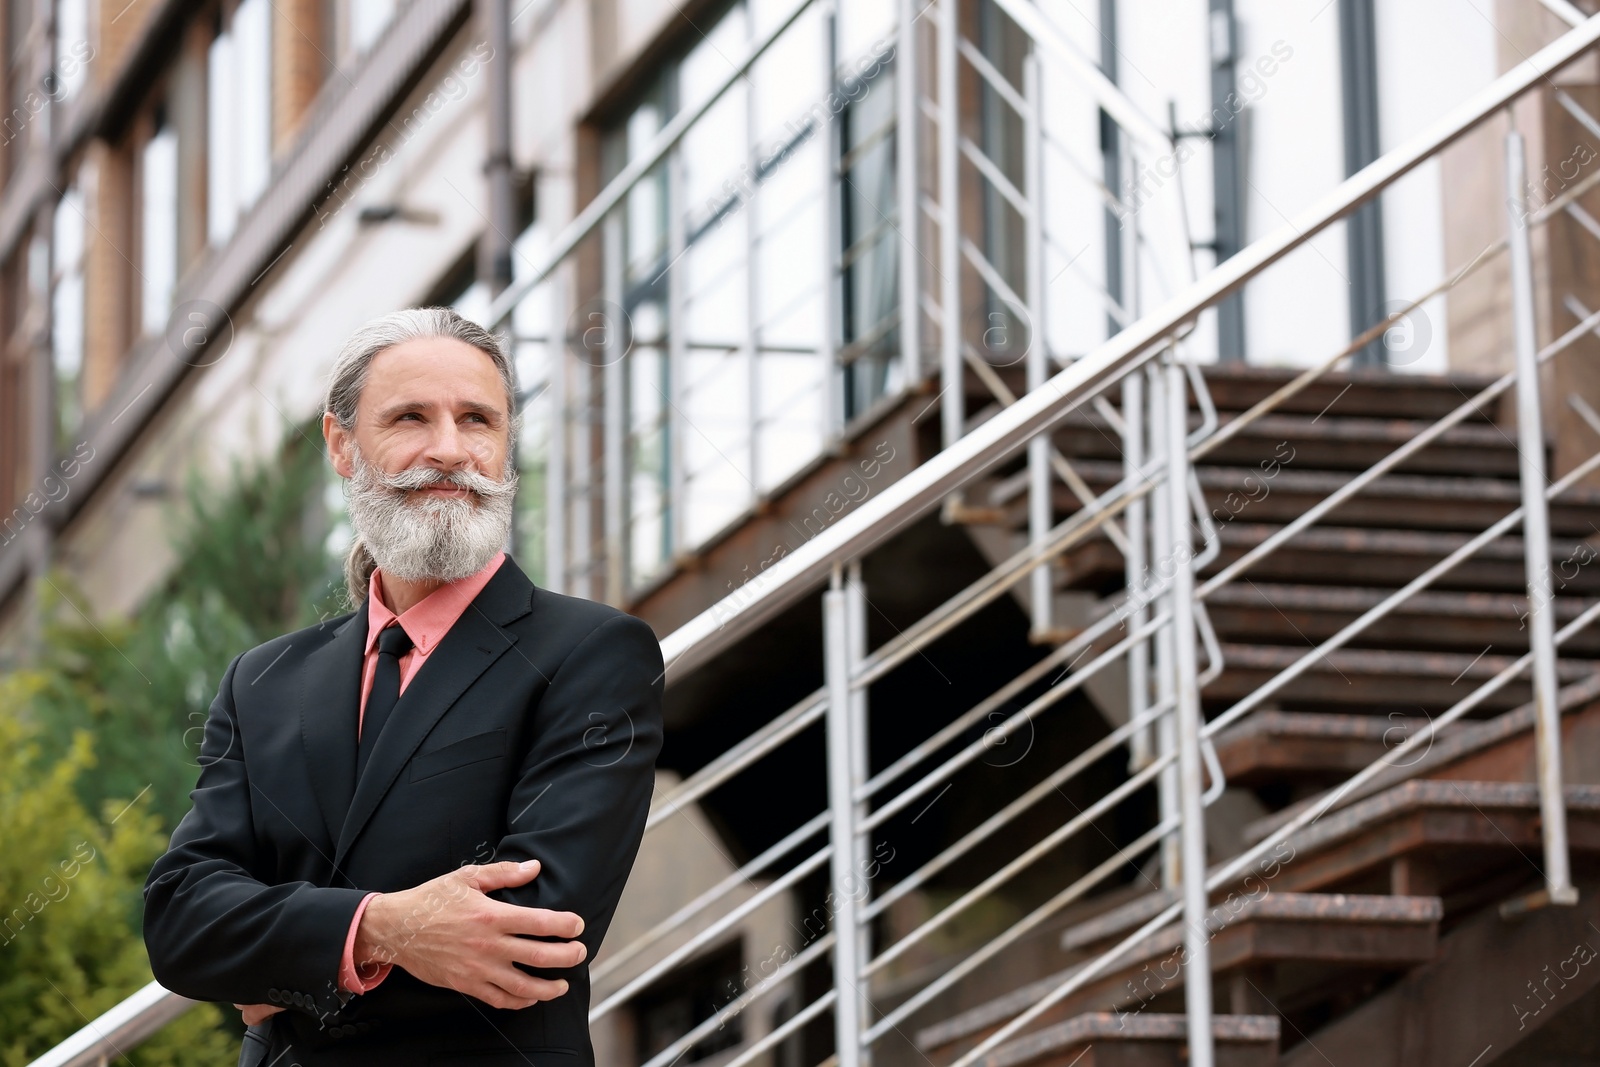 Photo of Handsome bearded mature man in suit, outdoors